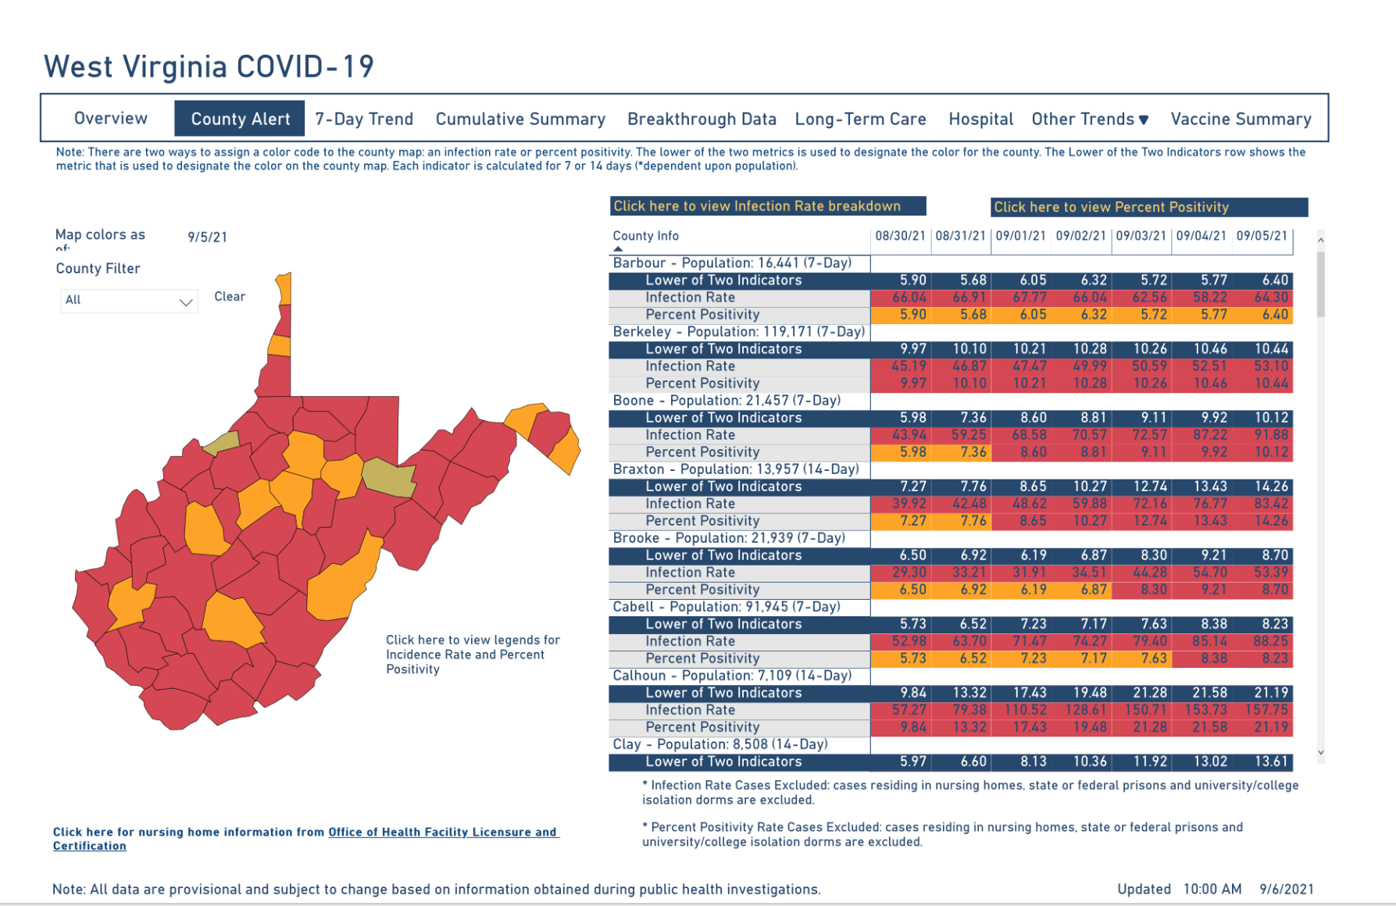 West Virginia COVID-19 County Alert Map, 9-6-2021